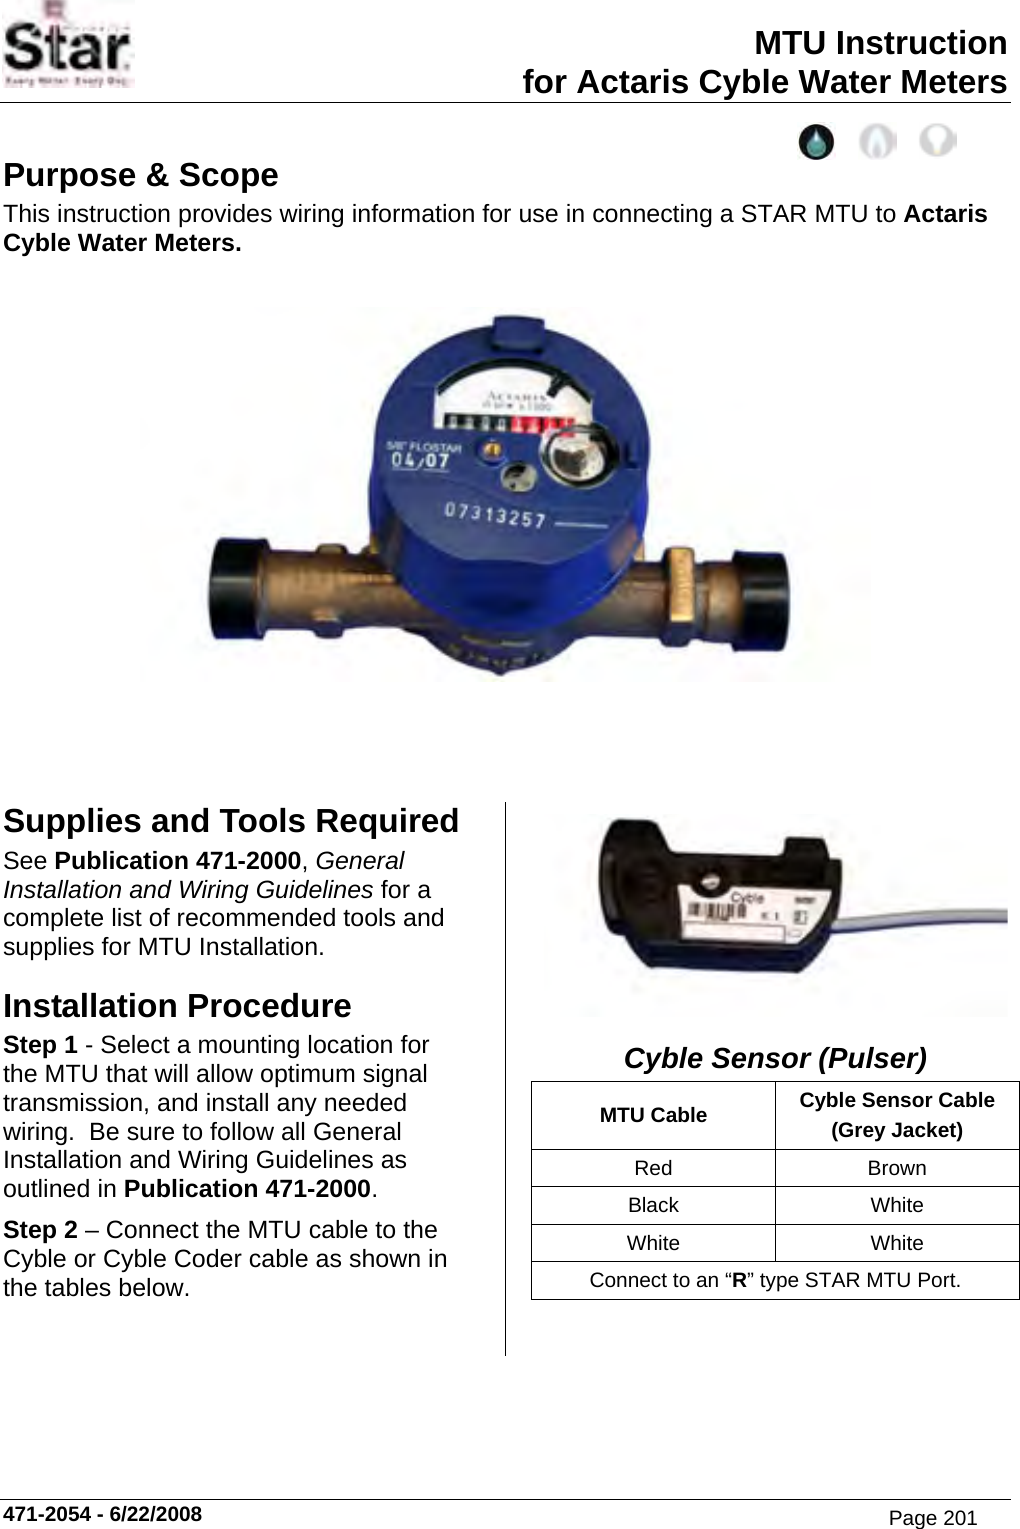 MTU Instruction for Actaris Cyble Water Meters Purpose &amp; Scope This instruction provides wiring information for use in connecting a STAR MTU to Actaris Cyble Water Meters.           Supplies and Tools Required See Publication 471-2000, General Installation and Wiring Guidelines for a complete list of recommended tools and supplies for MTU Installation. Installation Procedure Step 1 - Select a mounting location for the MTU that will allow optimum signal transmission, and install any needed wiring.  Be sure to follow all General Installation and Wiring Guidelines as outlined in Publication 471-2000. Step 2 – Connect the MTU cable to the Cyble or Cyble Coder cable as shown in the tables below.    Cyble Sensor (Pulser) MTU Cable  Cyble Sensor Cable (Grey Jacket) Red Brown Black White White White Connect to an “R” type STAR MTU Port. 471-2054 - 6/22/2008 Page 201